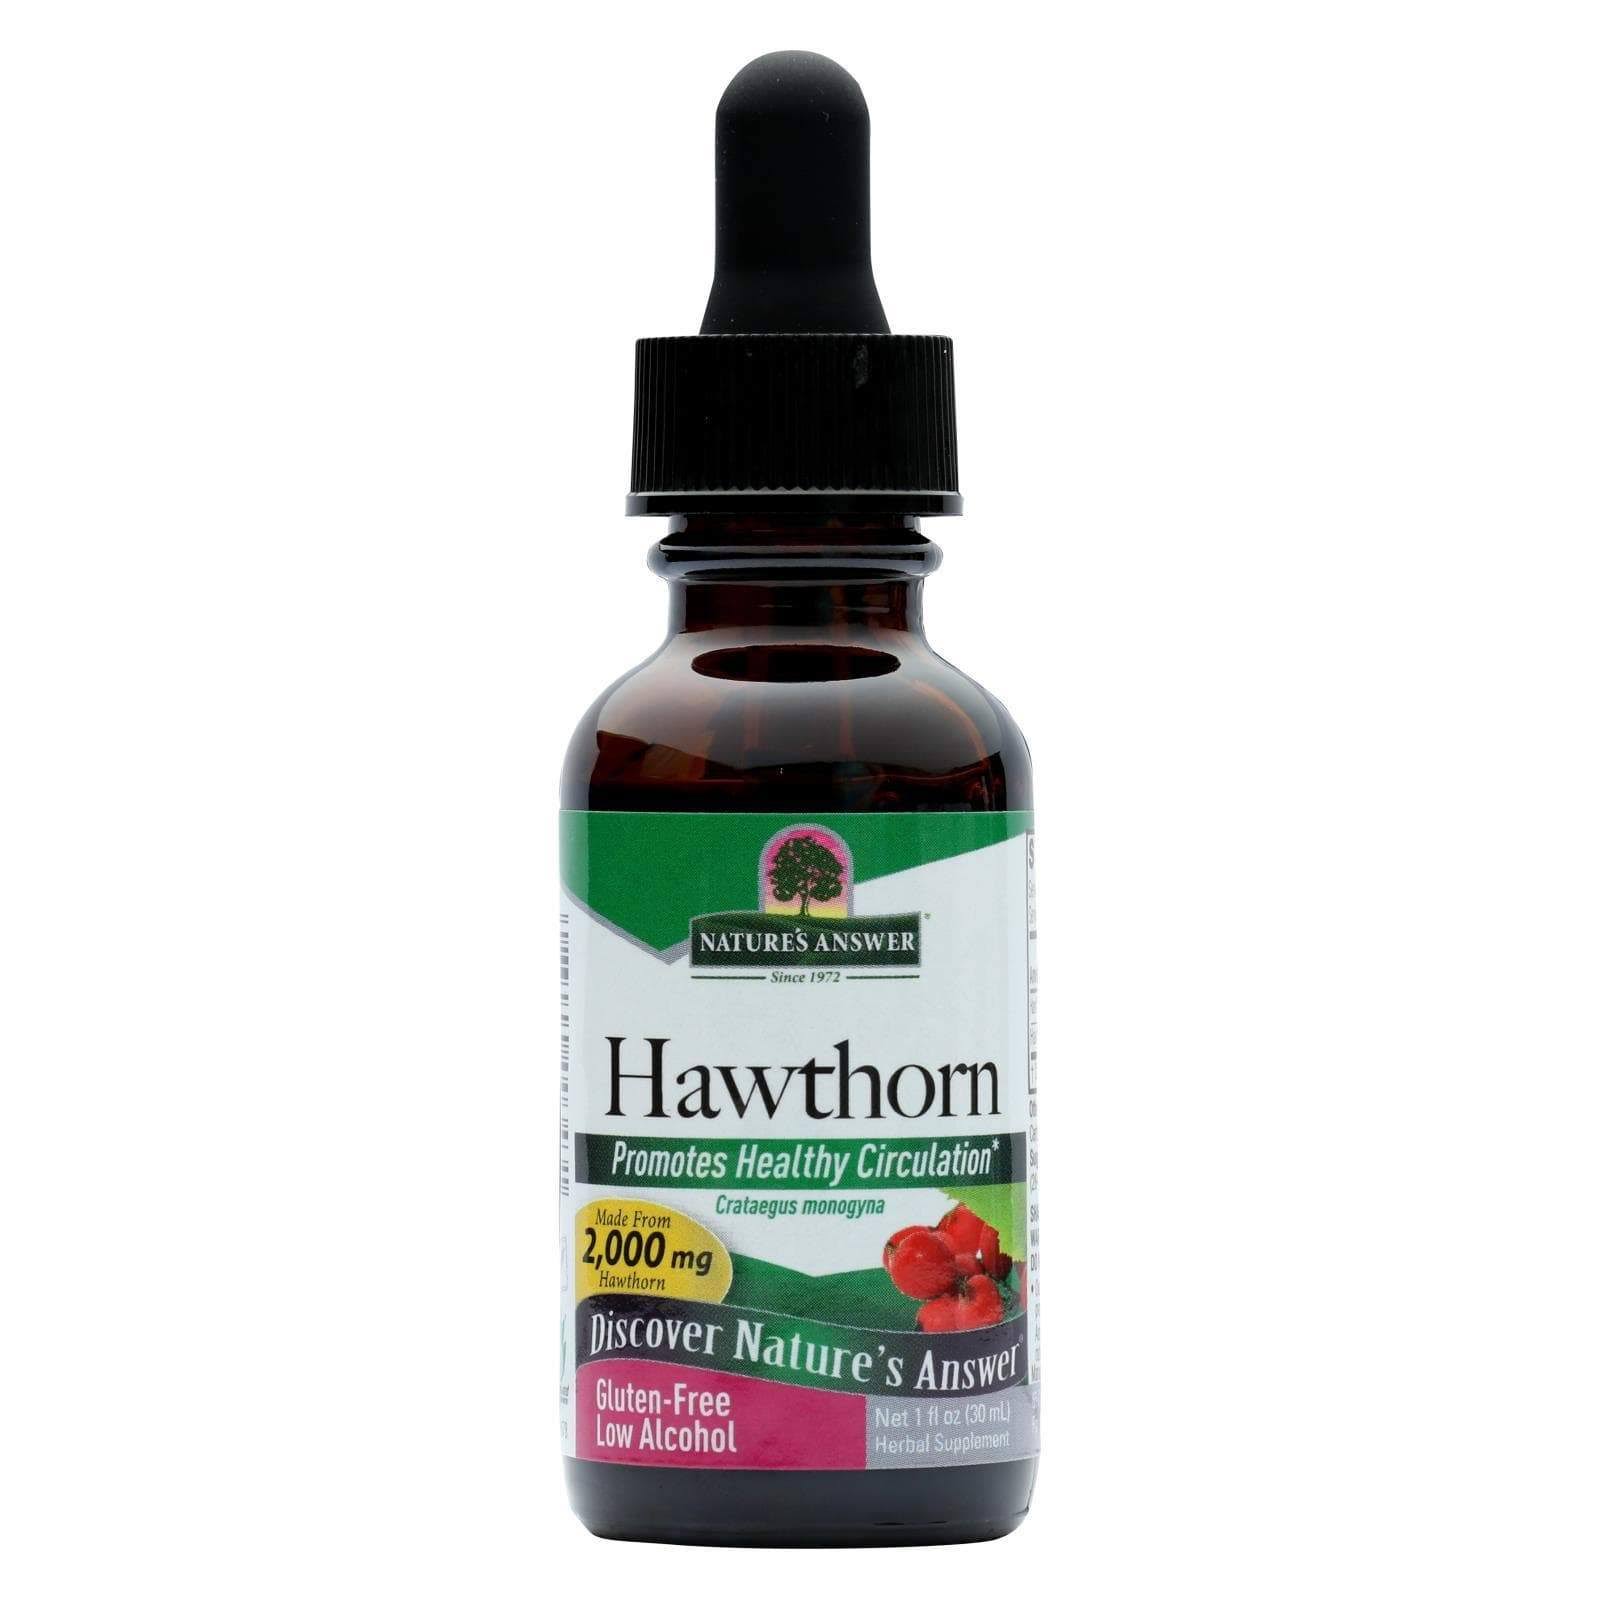 Natures Answer Hawthorn 2000mg